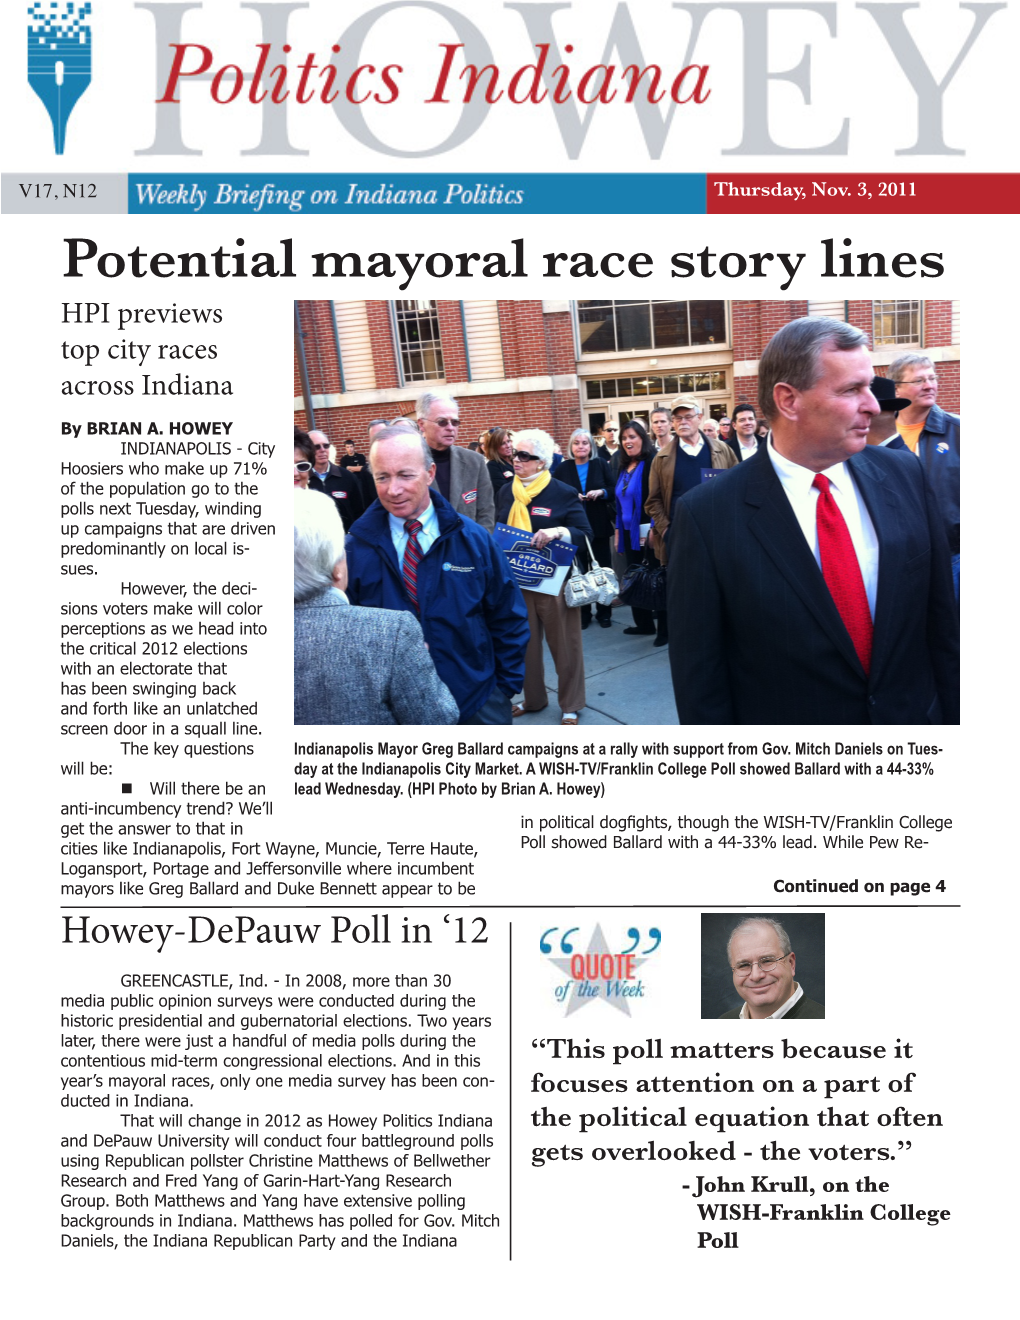 Potential Mayoral Race Story Lines HPI Previews Top City Races Across Indiana by BRIAN A